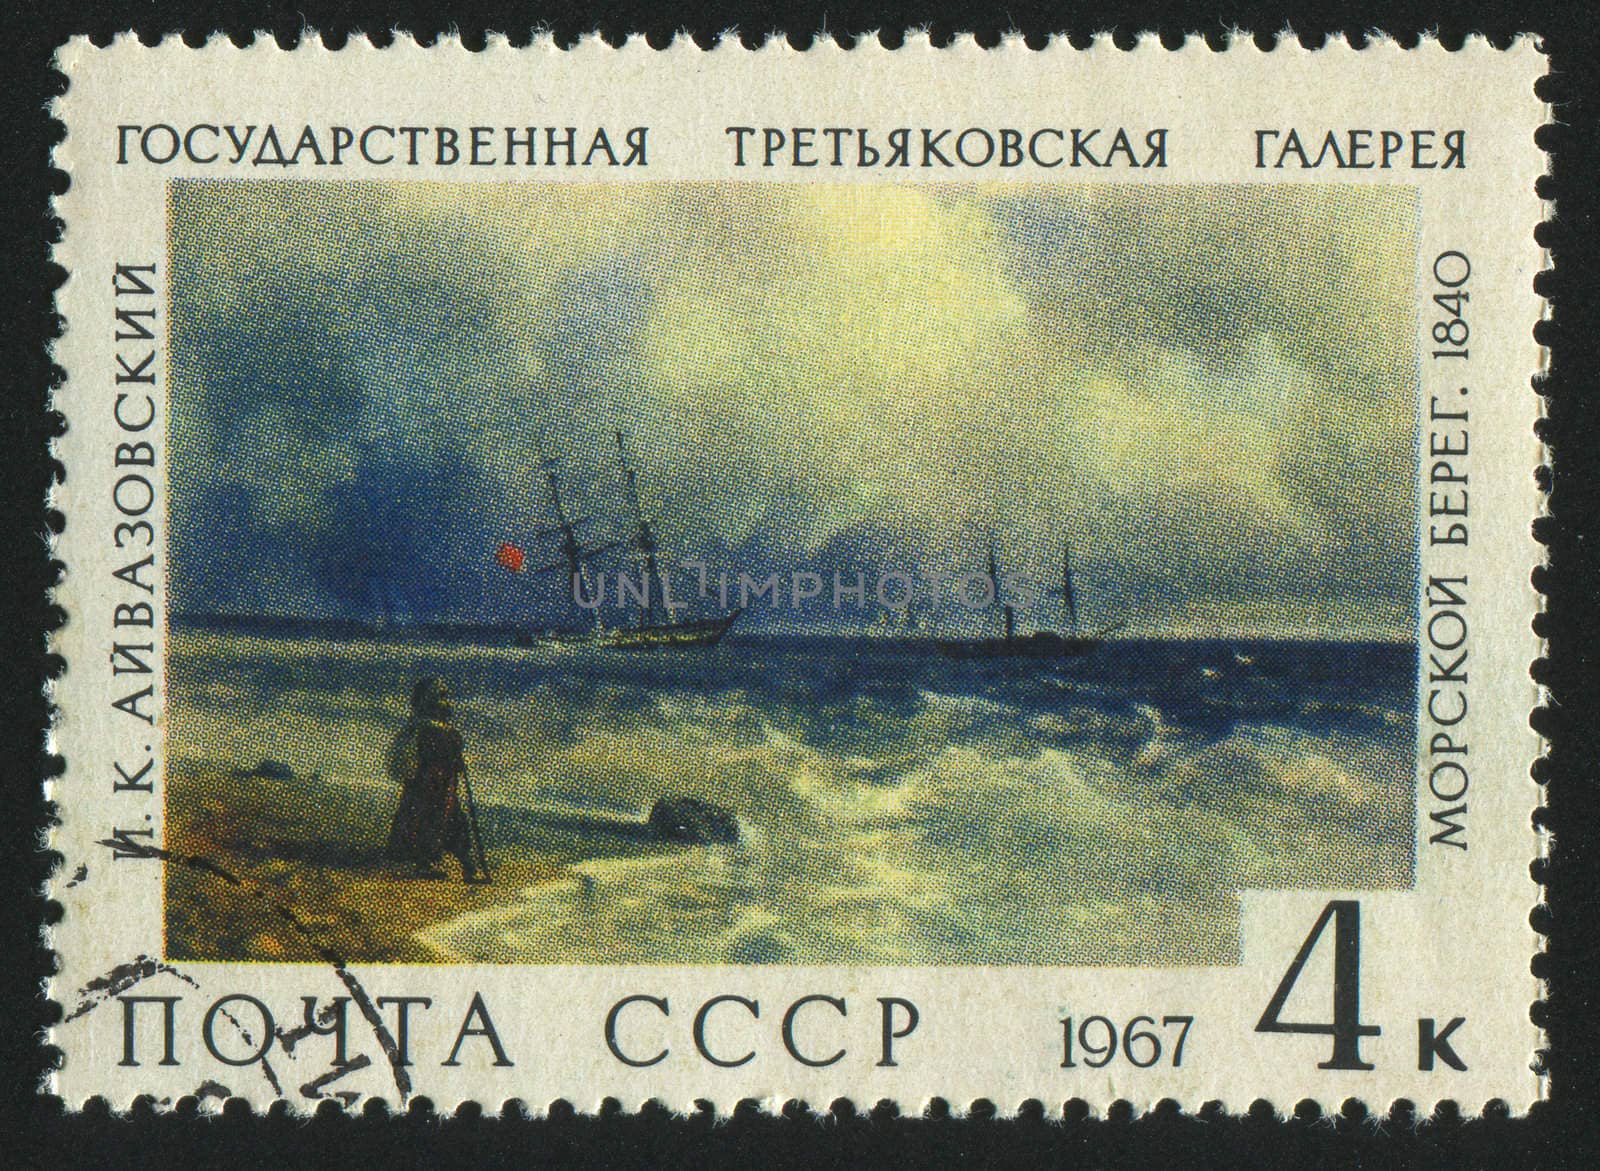 RUSSIA - CIRCA 1967: stamp printed by Russia, shows Seascape by Ivan Aivazovsky,  circa 1967.